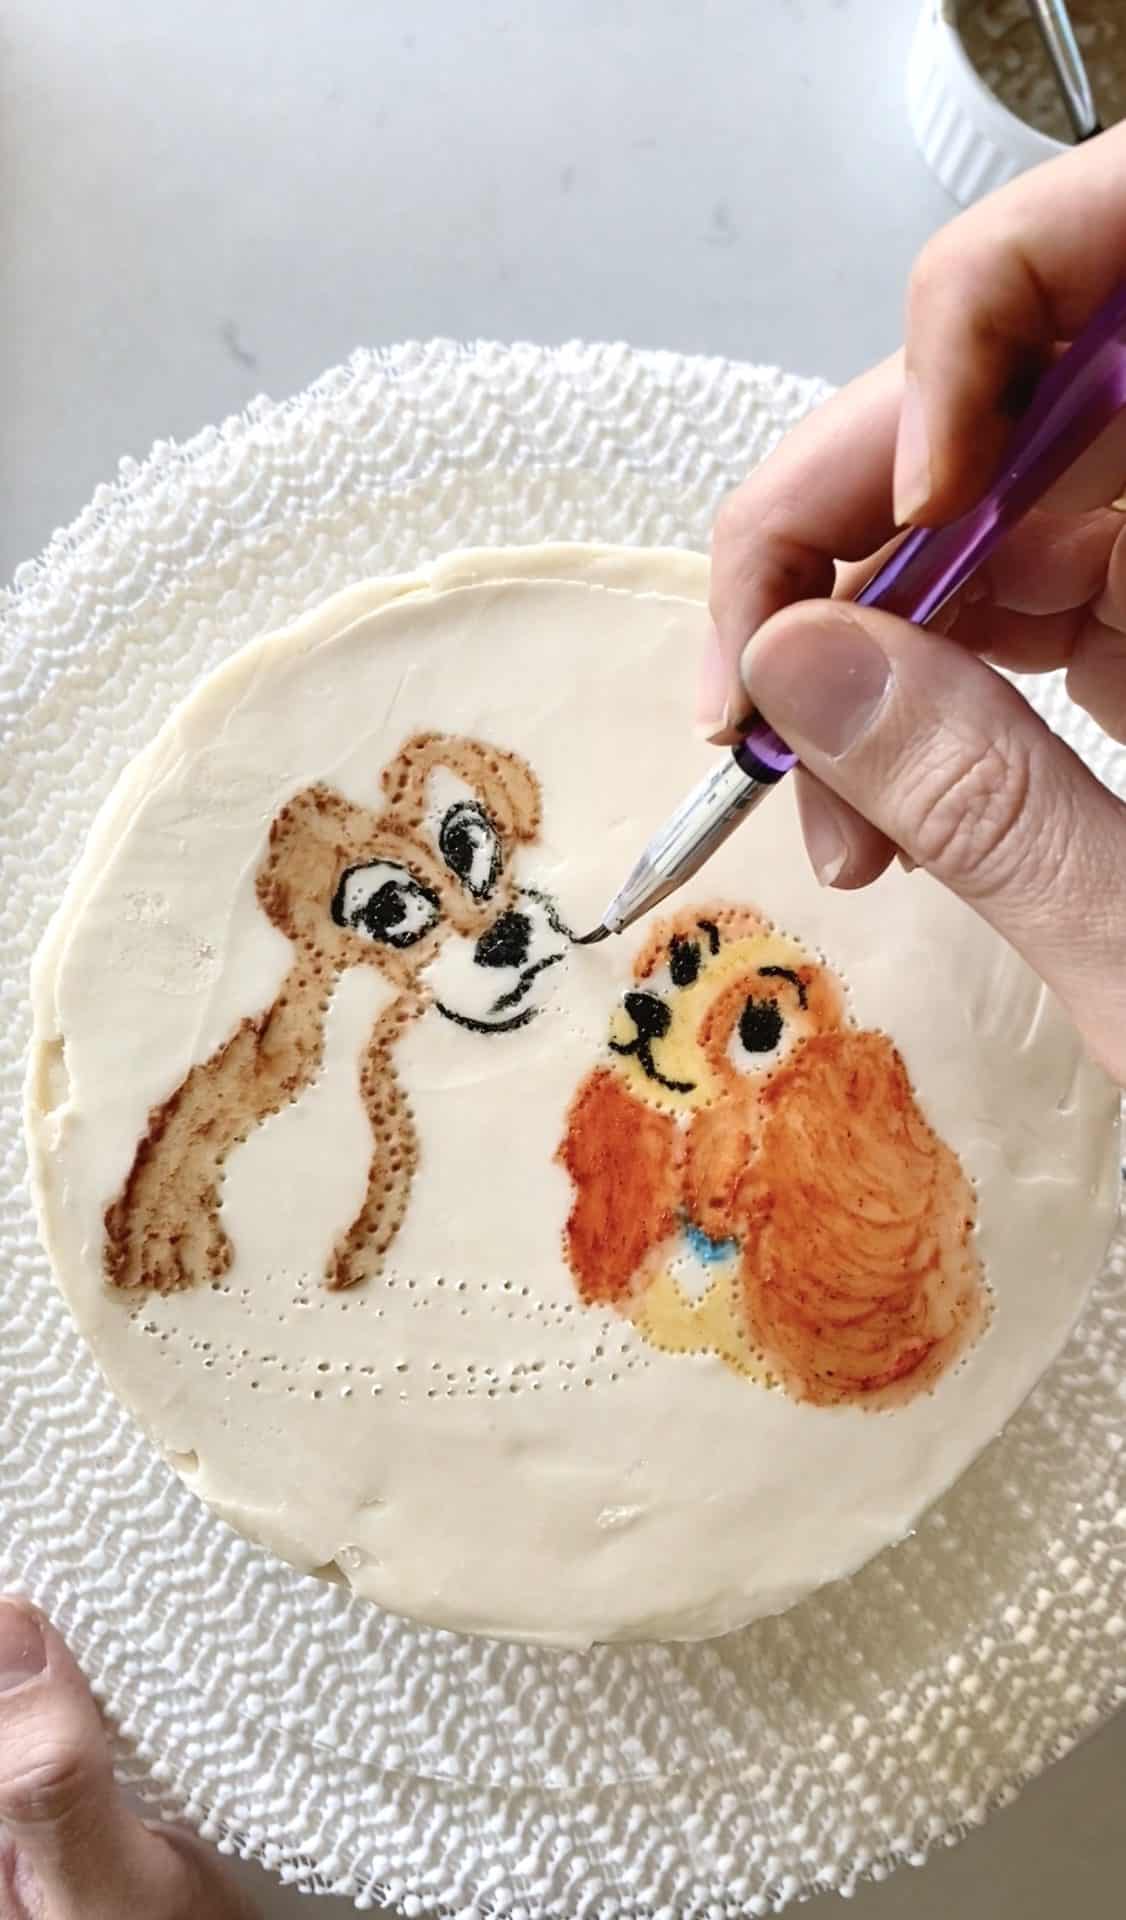 Painting Lady and the Tramp Cake